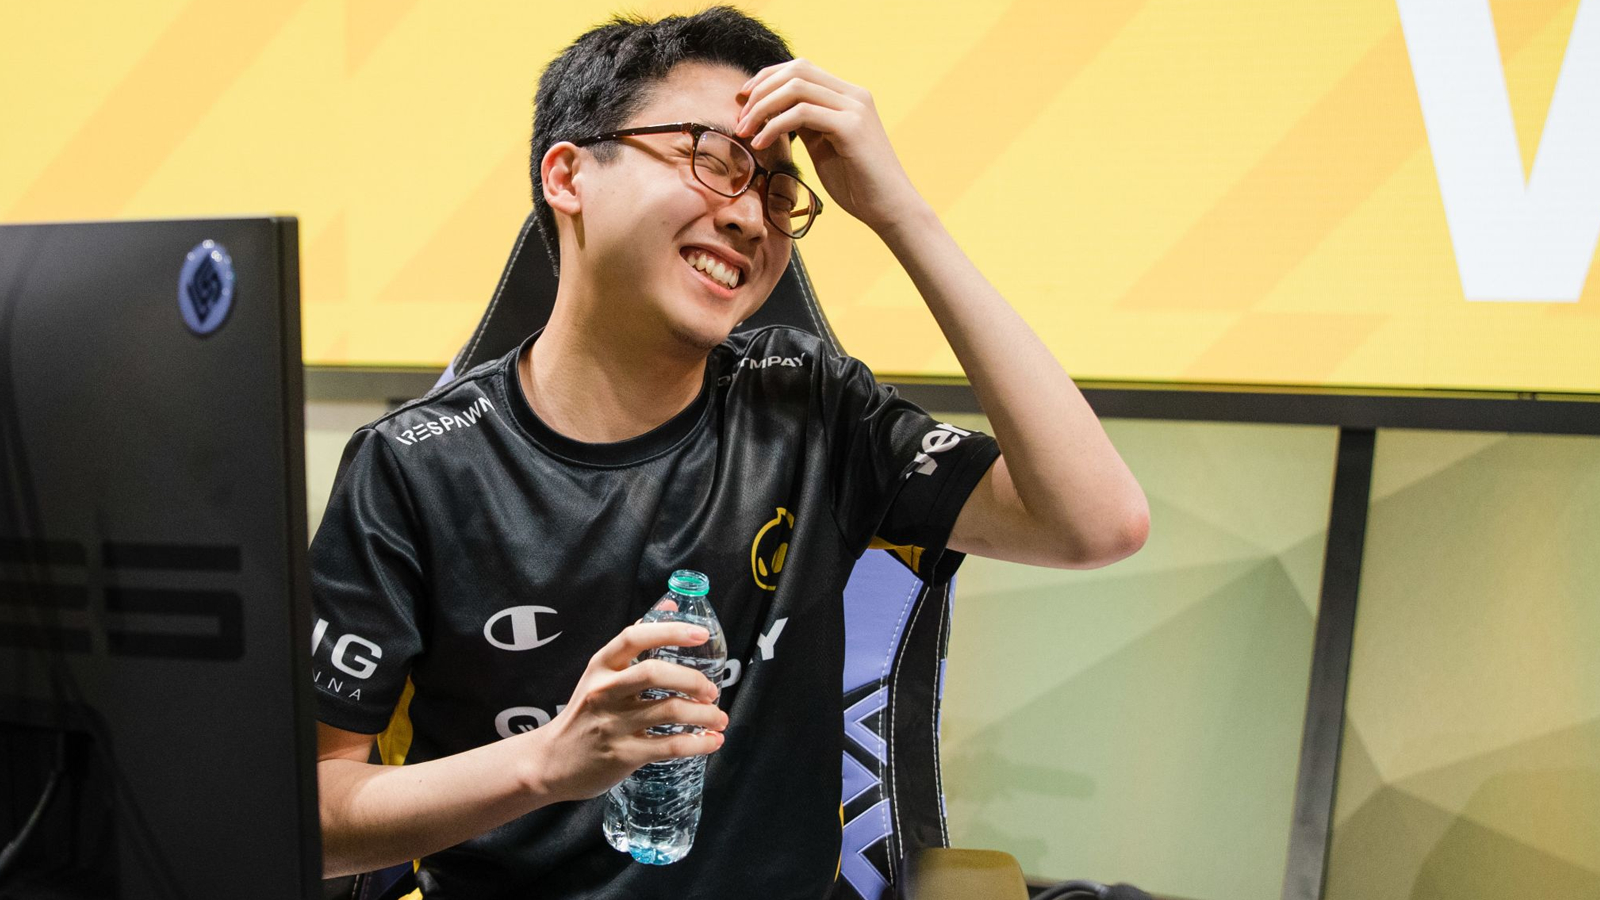 Top 15] LOL Best Streamers That Are Great  Top league, League of legends,  Team dignitas